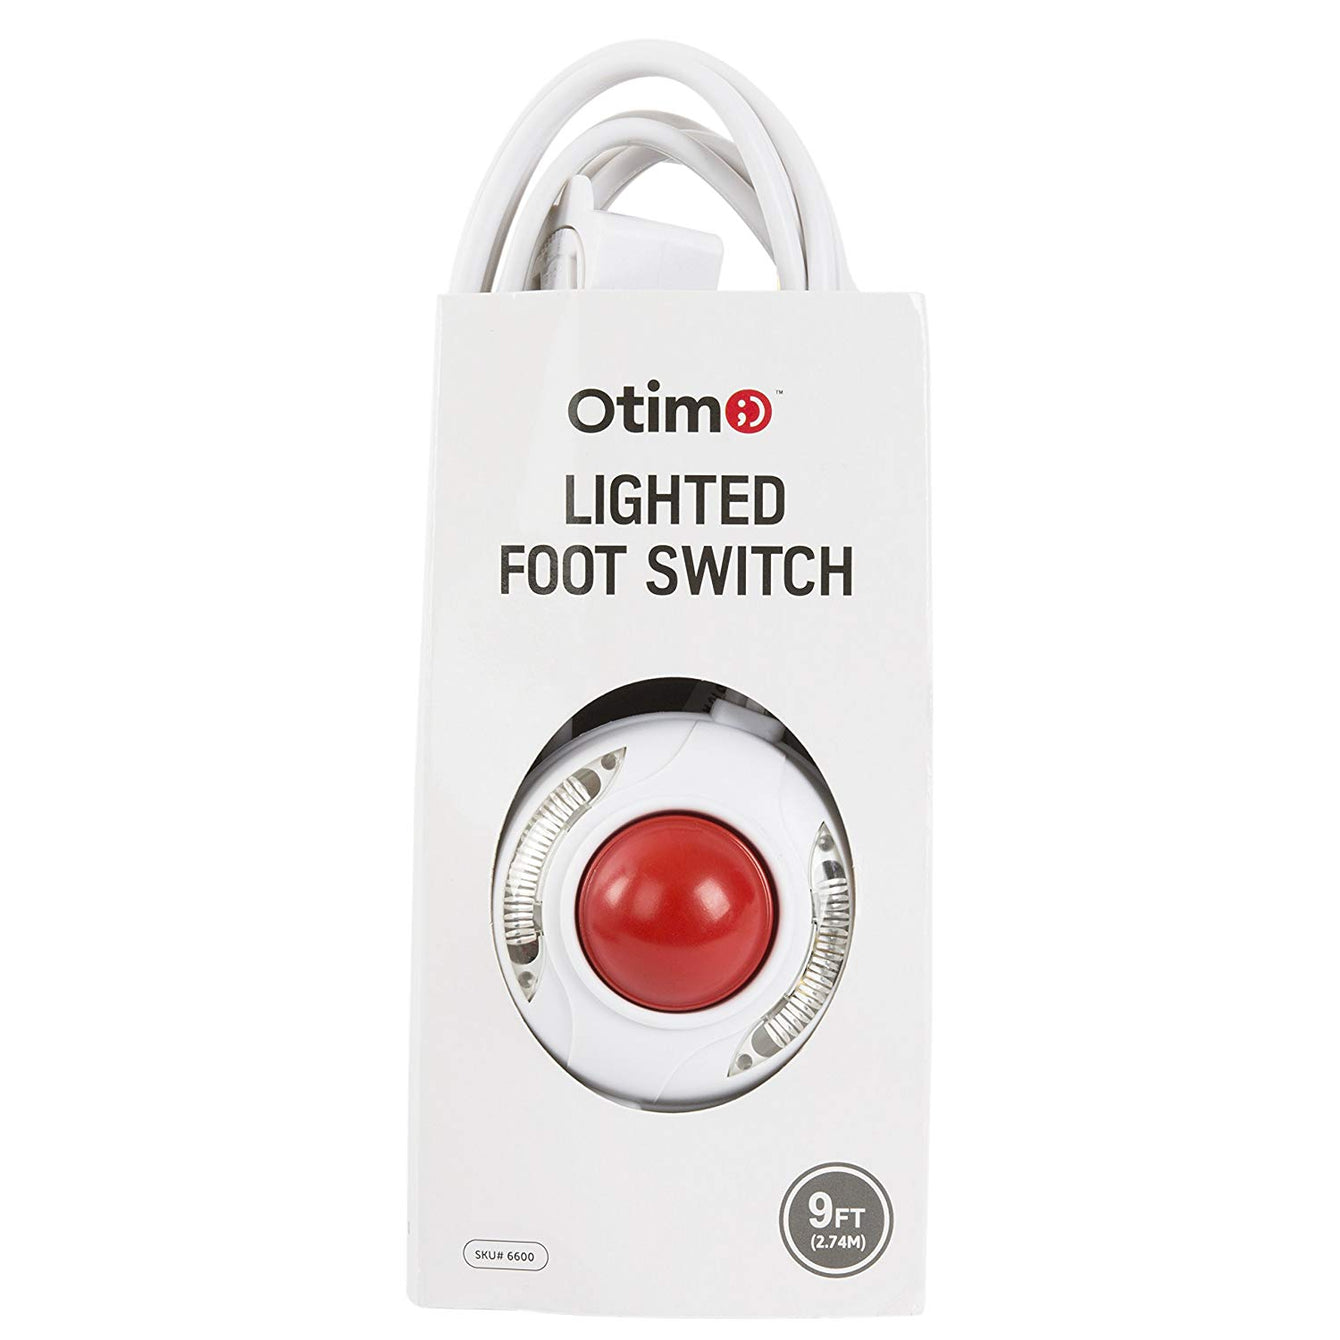 Otimo (10 Pack) Lighted Foot Switch with 9 Ft 3 Outlet Cord - White Extension Cable